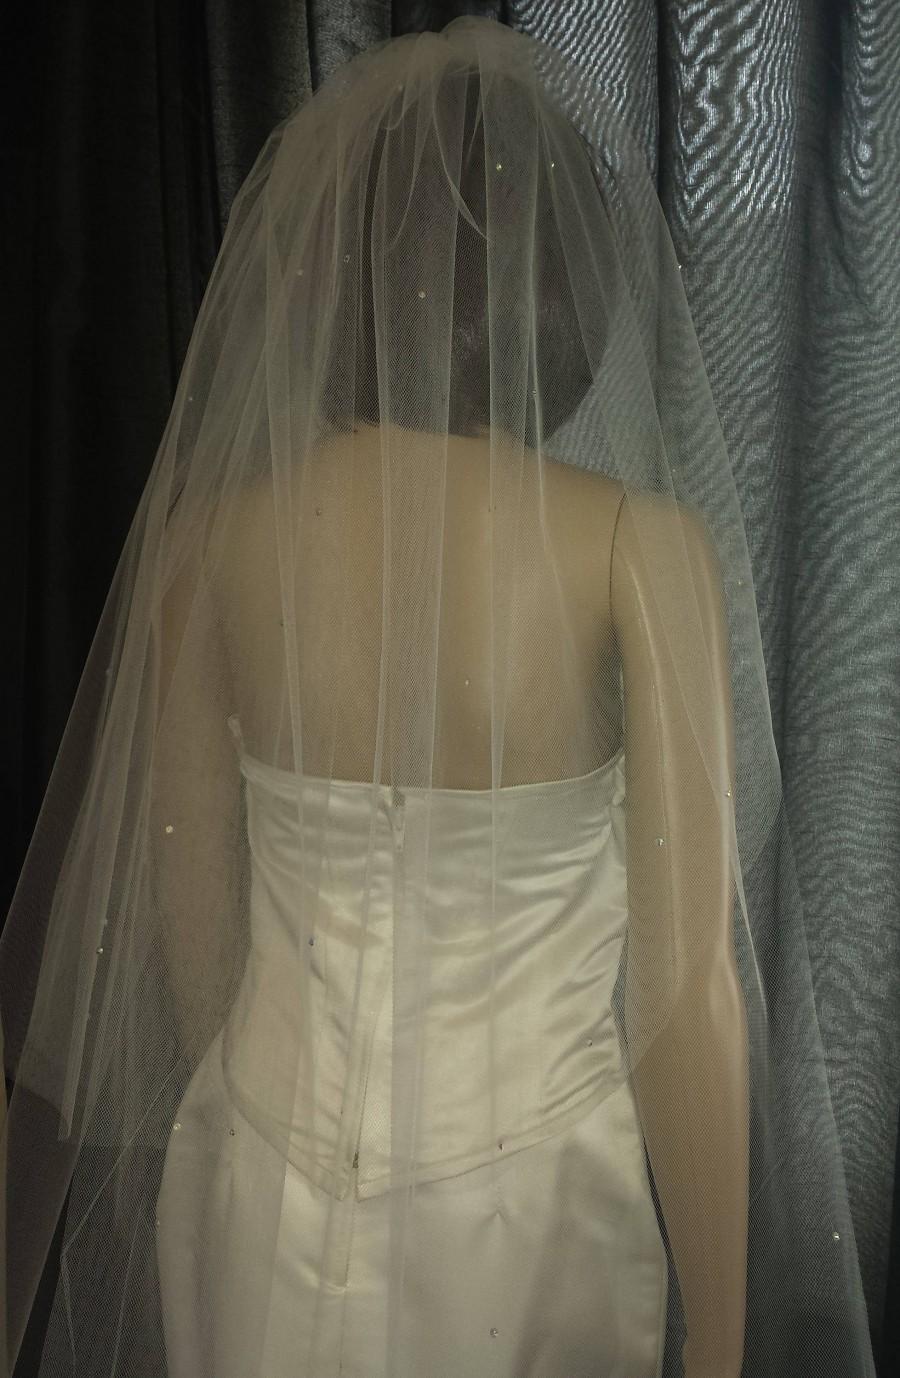 Wedding - Ivory Wedding veil cathedral length 2 tiers 30"/ 108" scattered with Diamante Rhinestones. FREE UK POSTAGE